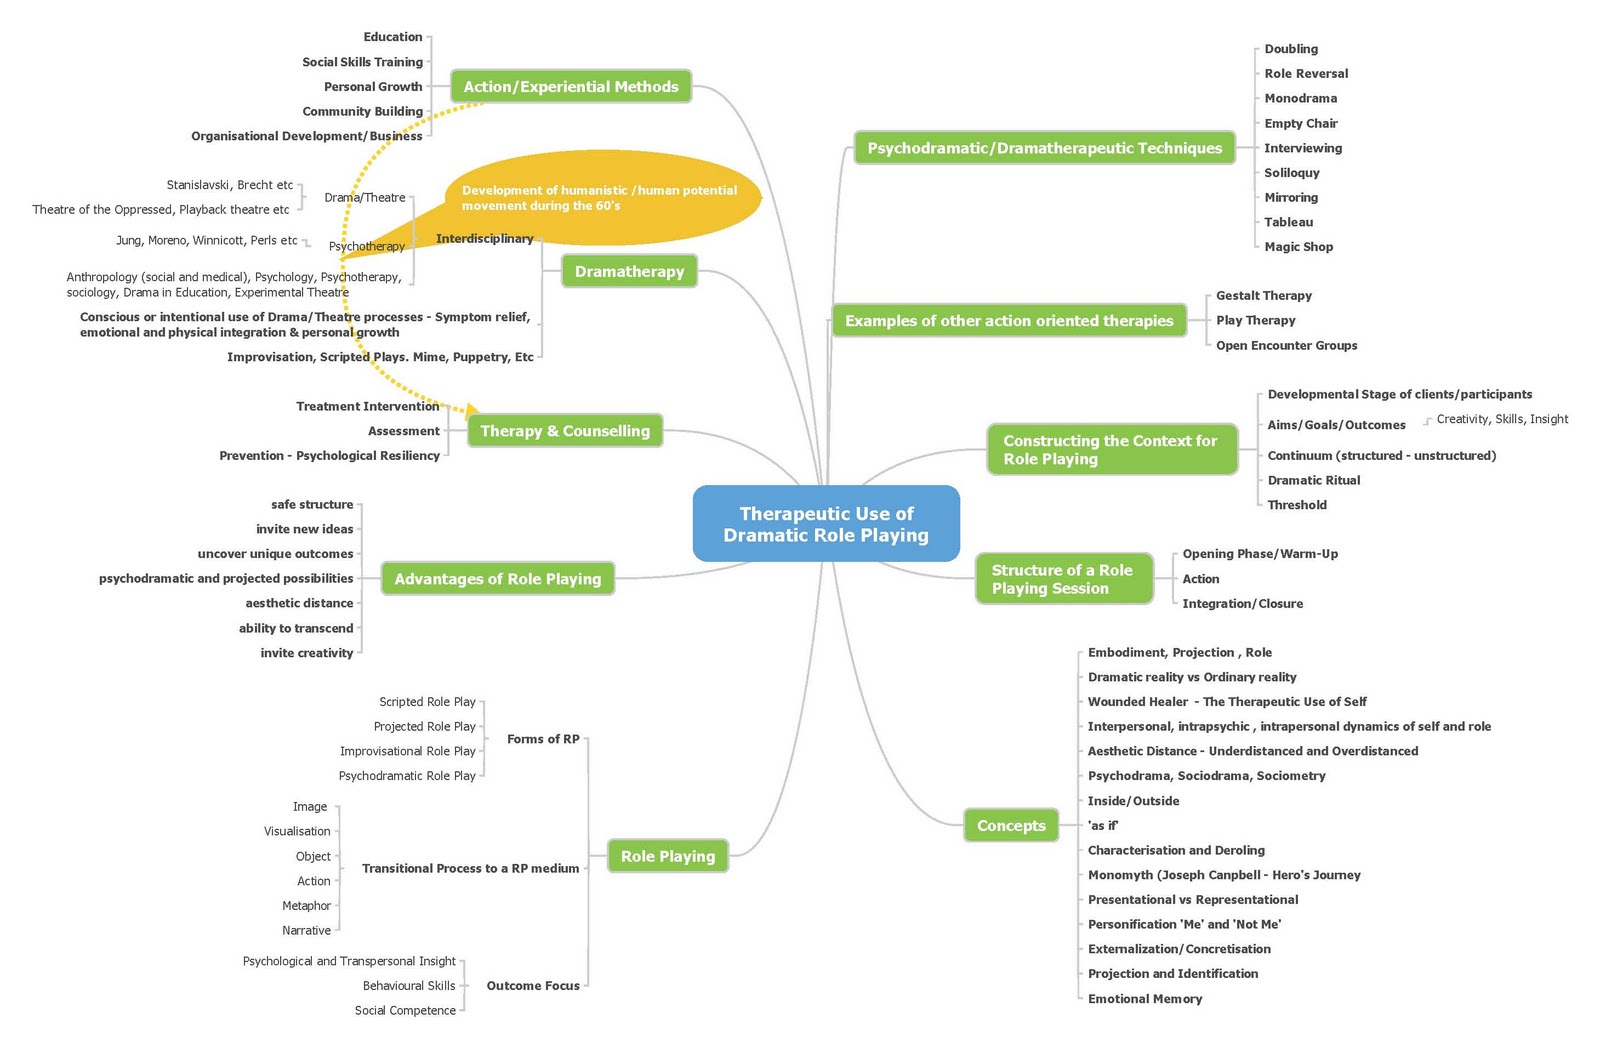 My Mindmap – An overview on the Therapeutic Use of Dramatic Role Playing My+Mindmap+%E2%80%93+An+overview+on+the+Therapeutic+Use+of+Dramatic+Role+Playing